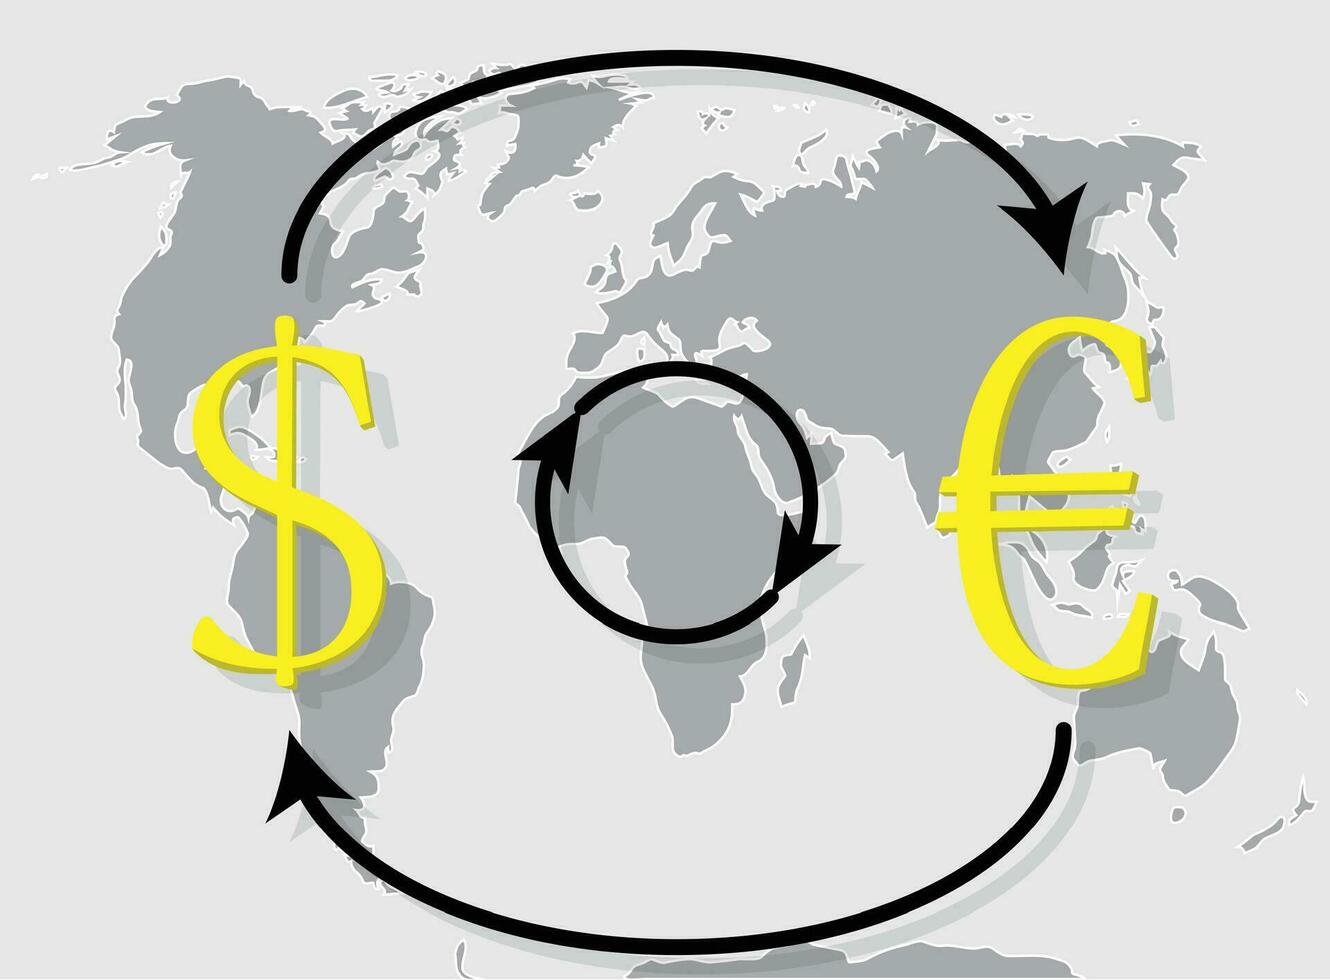 Currency exchange euro dollar on world map background vector